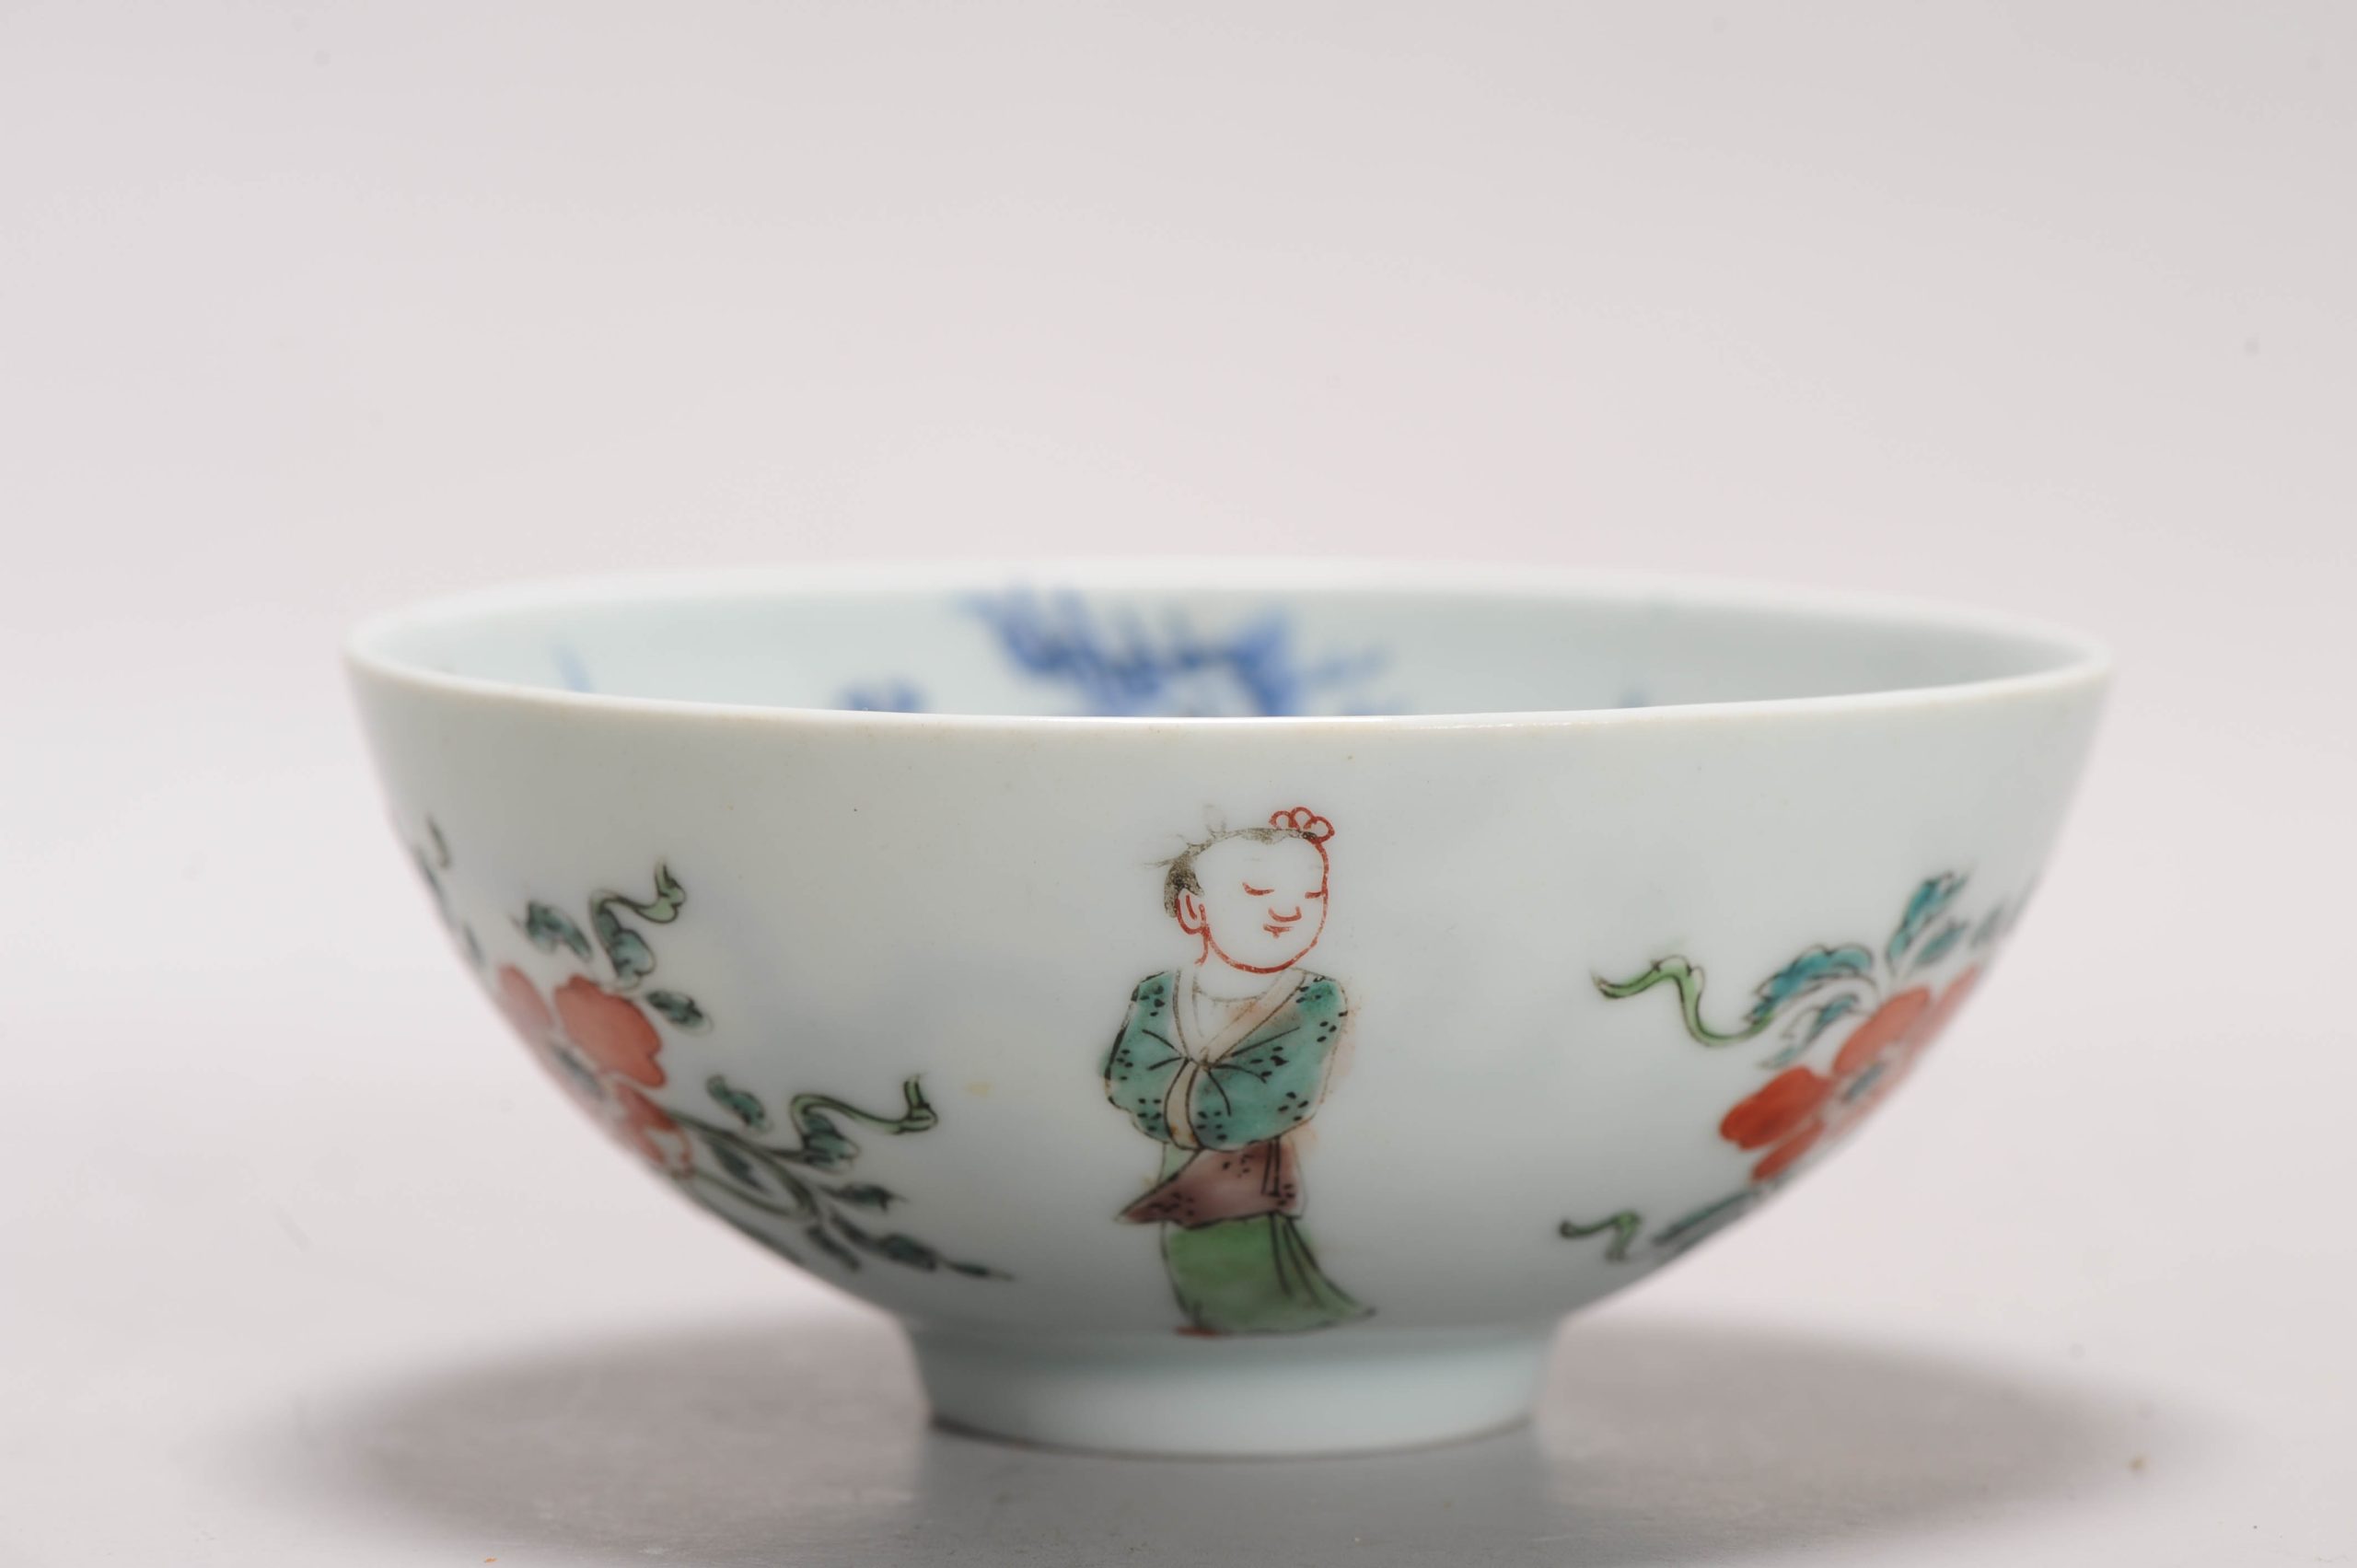 1314 A Yongzheng Mark and Period dragon bowl with later Overglaze decoration Amsterdam Bont